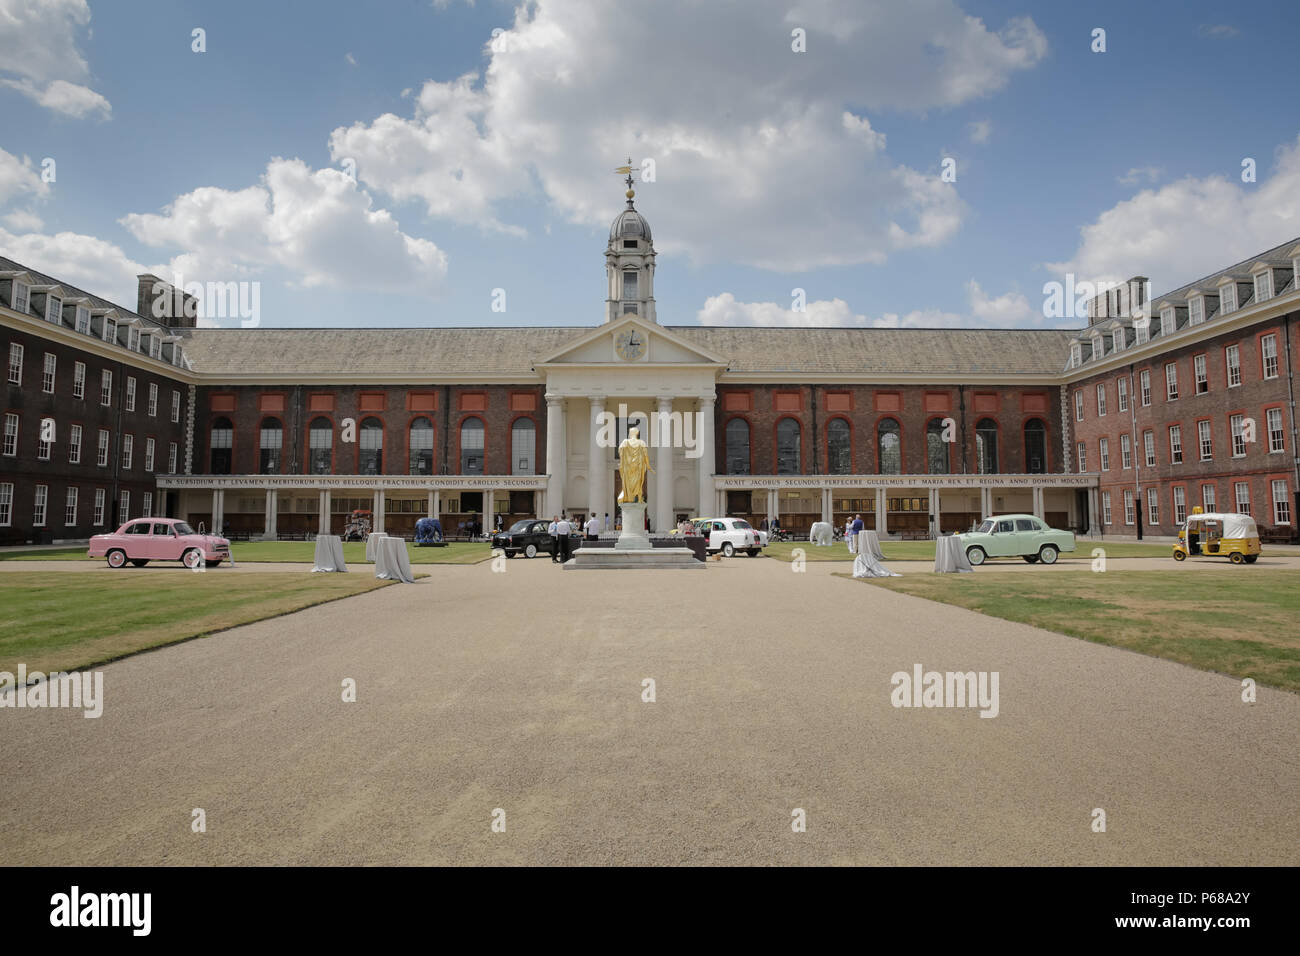 London, UK. 28th June, 2018. Judging of the dazzling Concours d’éléphant fleet of customised vehicles led by HRH Prince Michael of Kent at the Royal Hospital Chelsea.  Credit: amanda rose/Alamy Live News Stock Photo